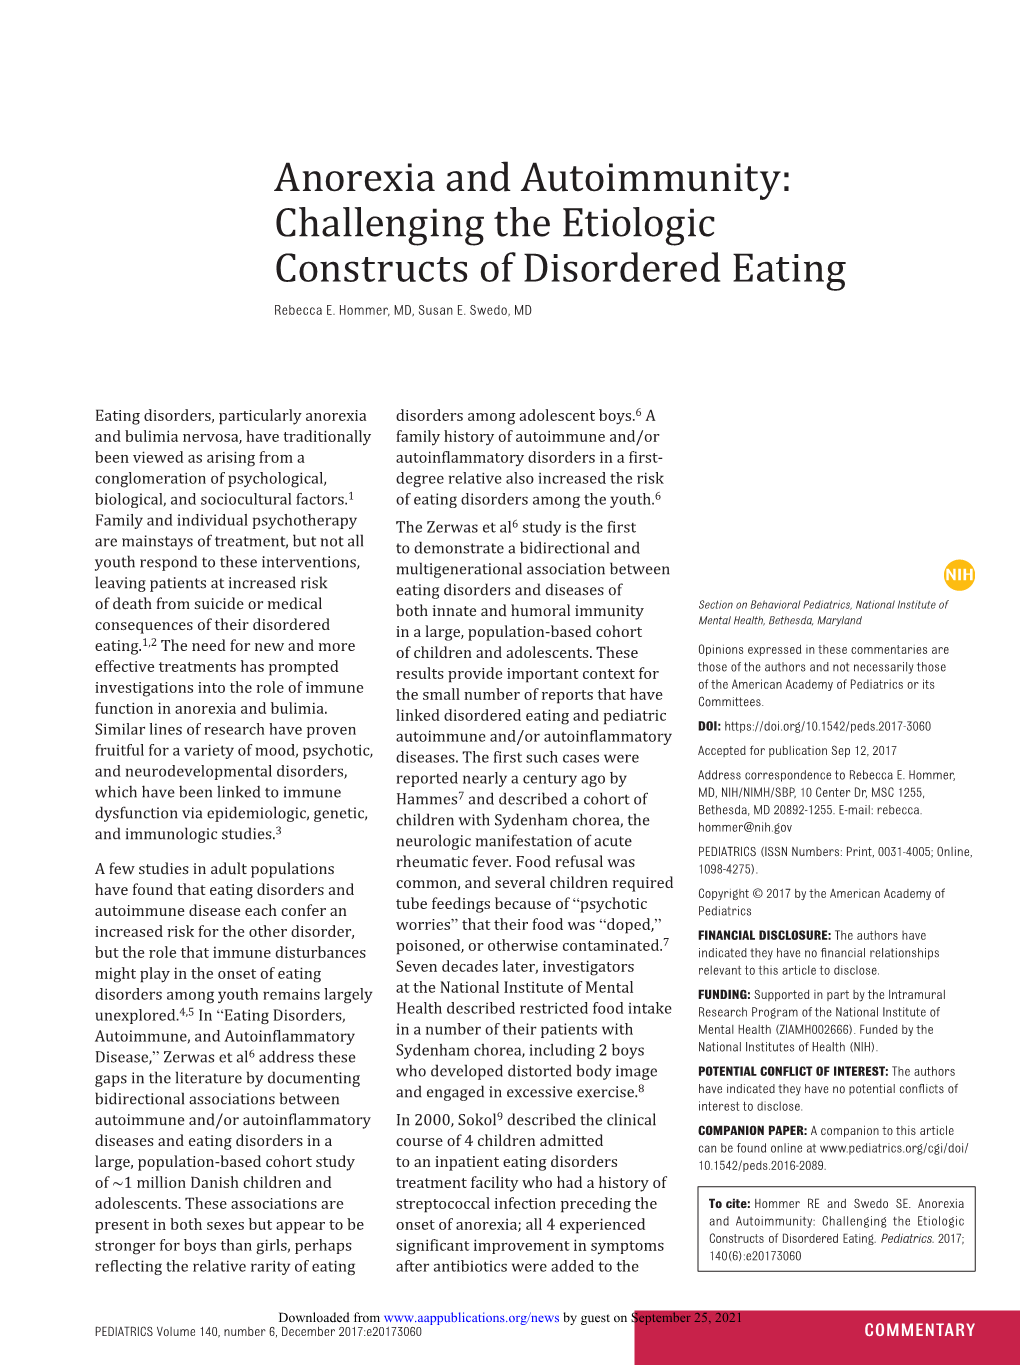 Challenging the Etiologic Constructs of Disordered Eating 6 140 Pediatrics 2017 ROUGH GALLEY PROOF 2